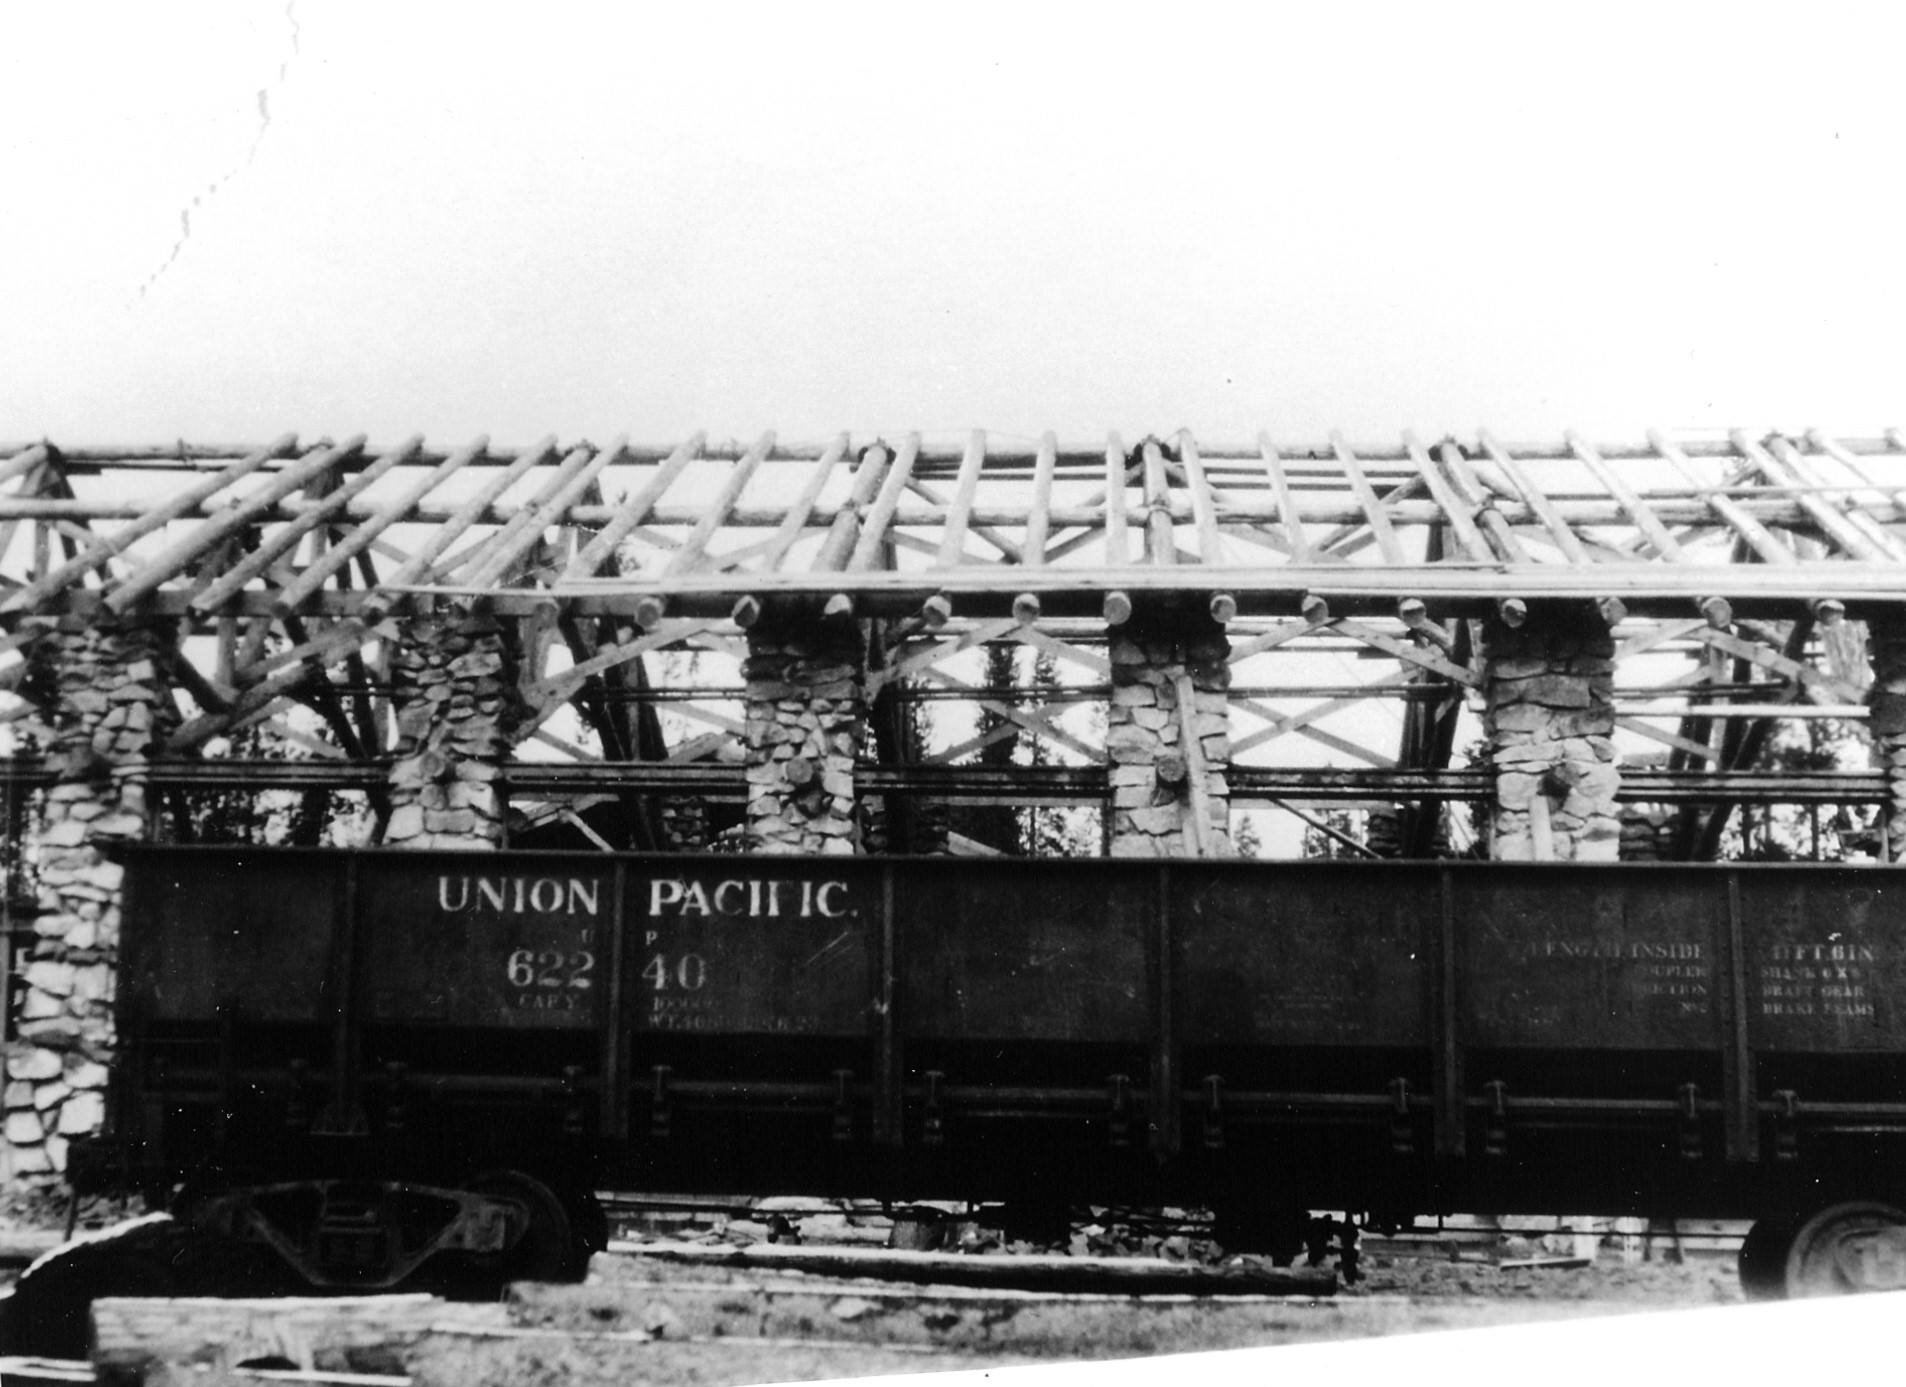  Construction of Union Pacific Dining Lodge, circa 1925.  